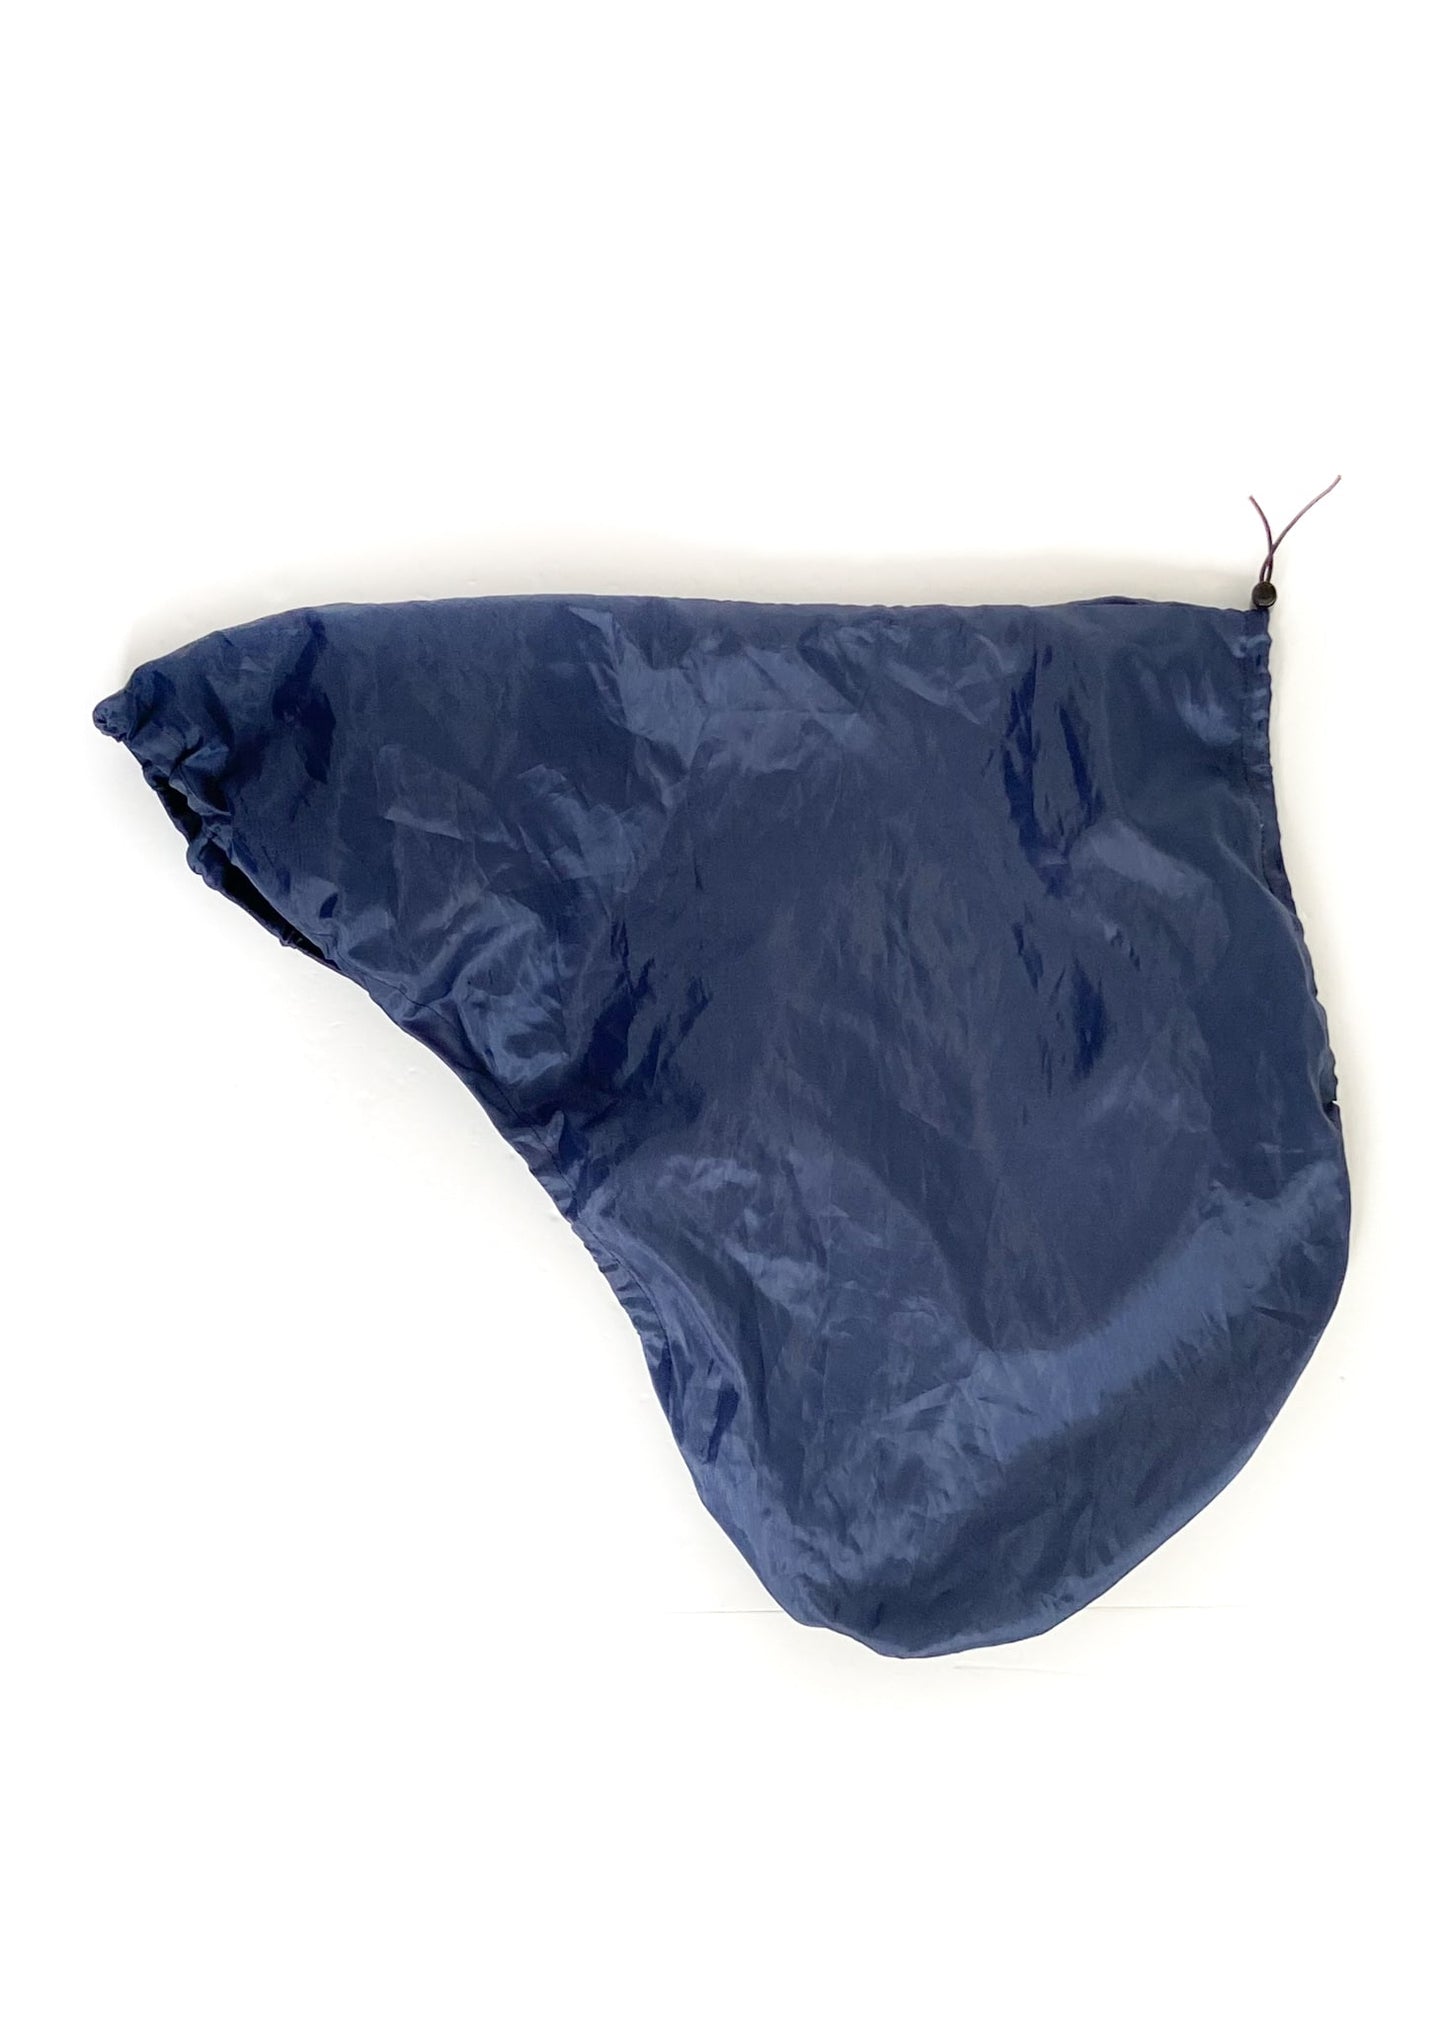 Supra English Saddle Cover with Drawstring - Navy - One Size